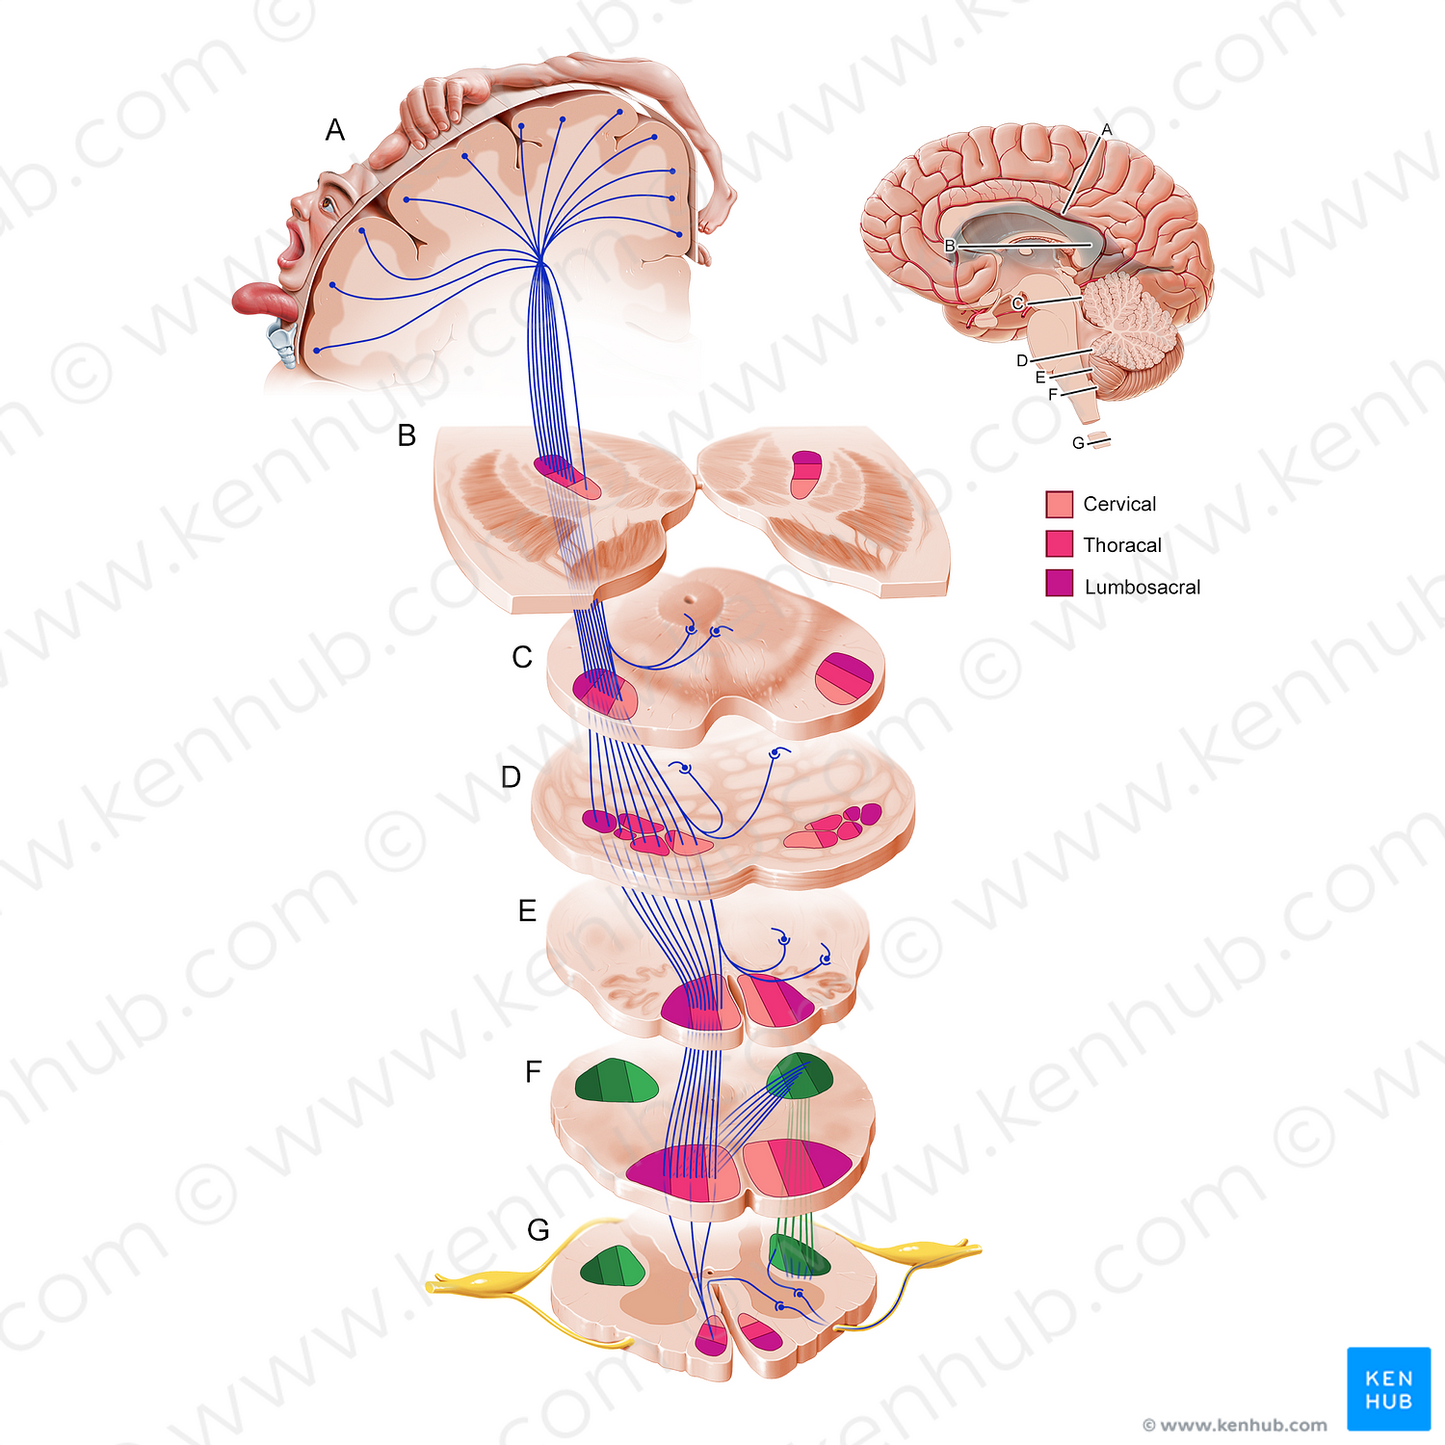 Lateral corticospinal tract (#21168)